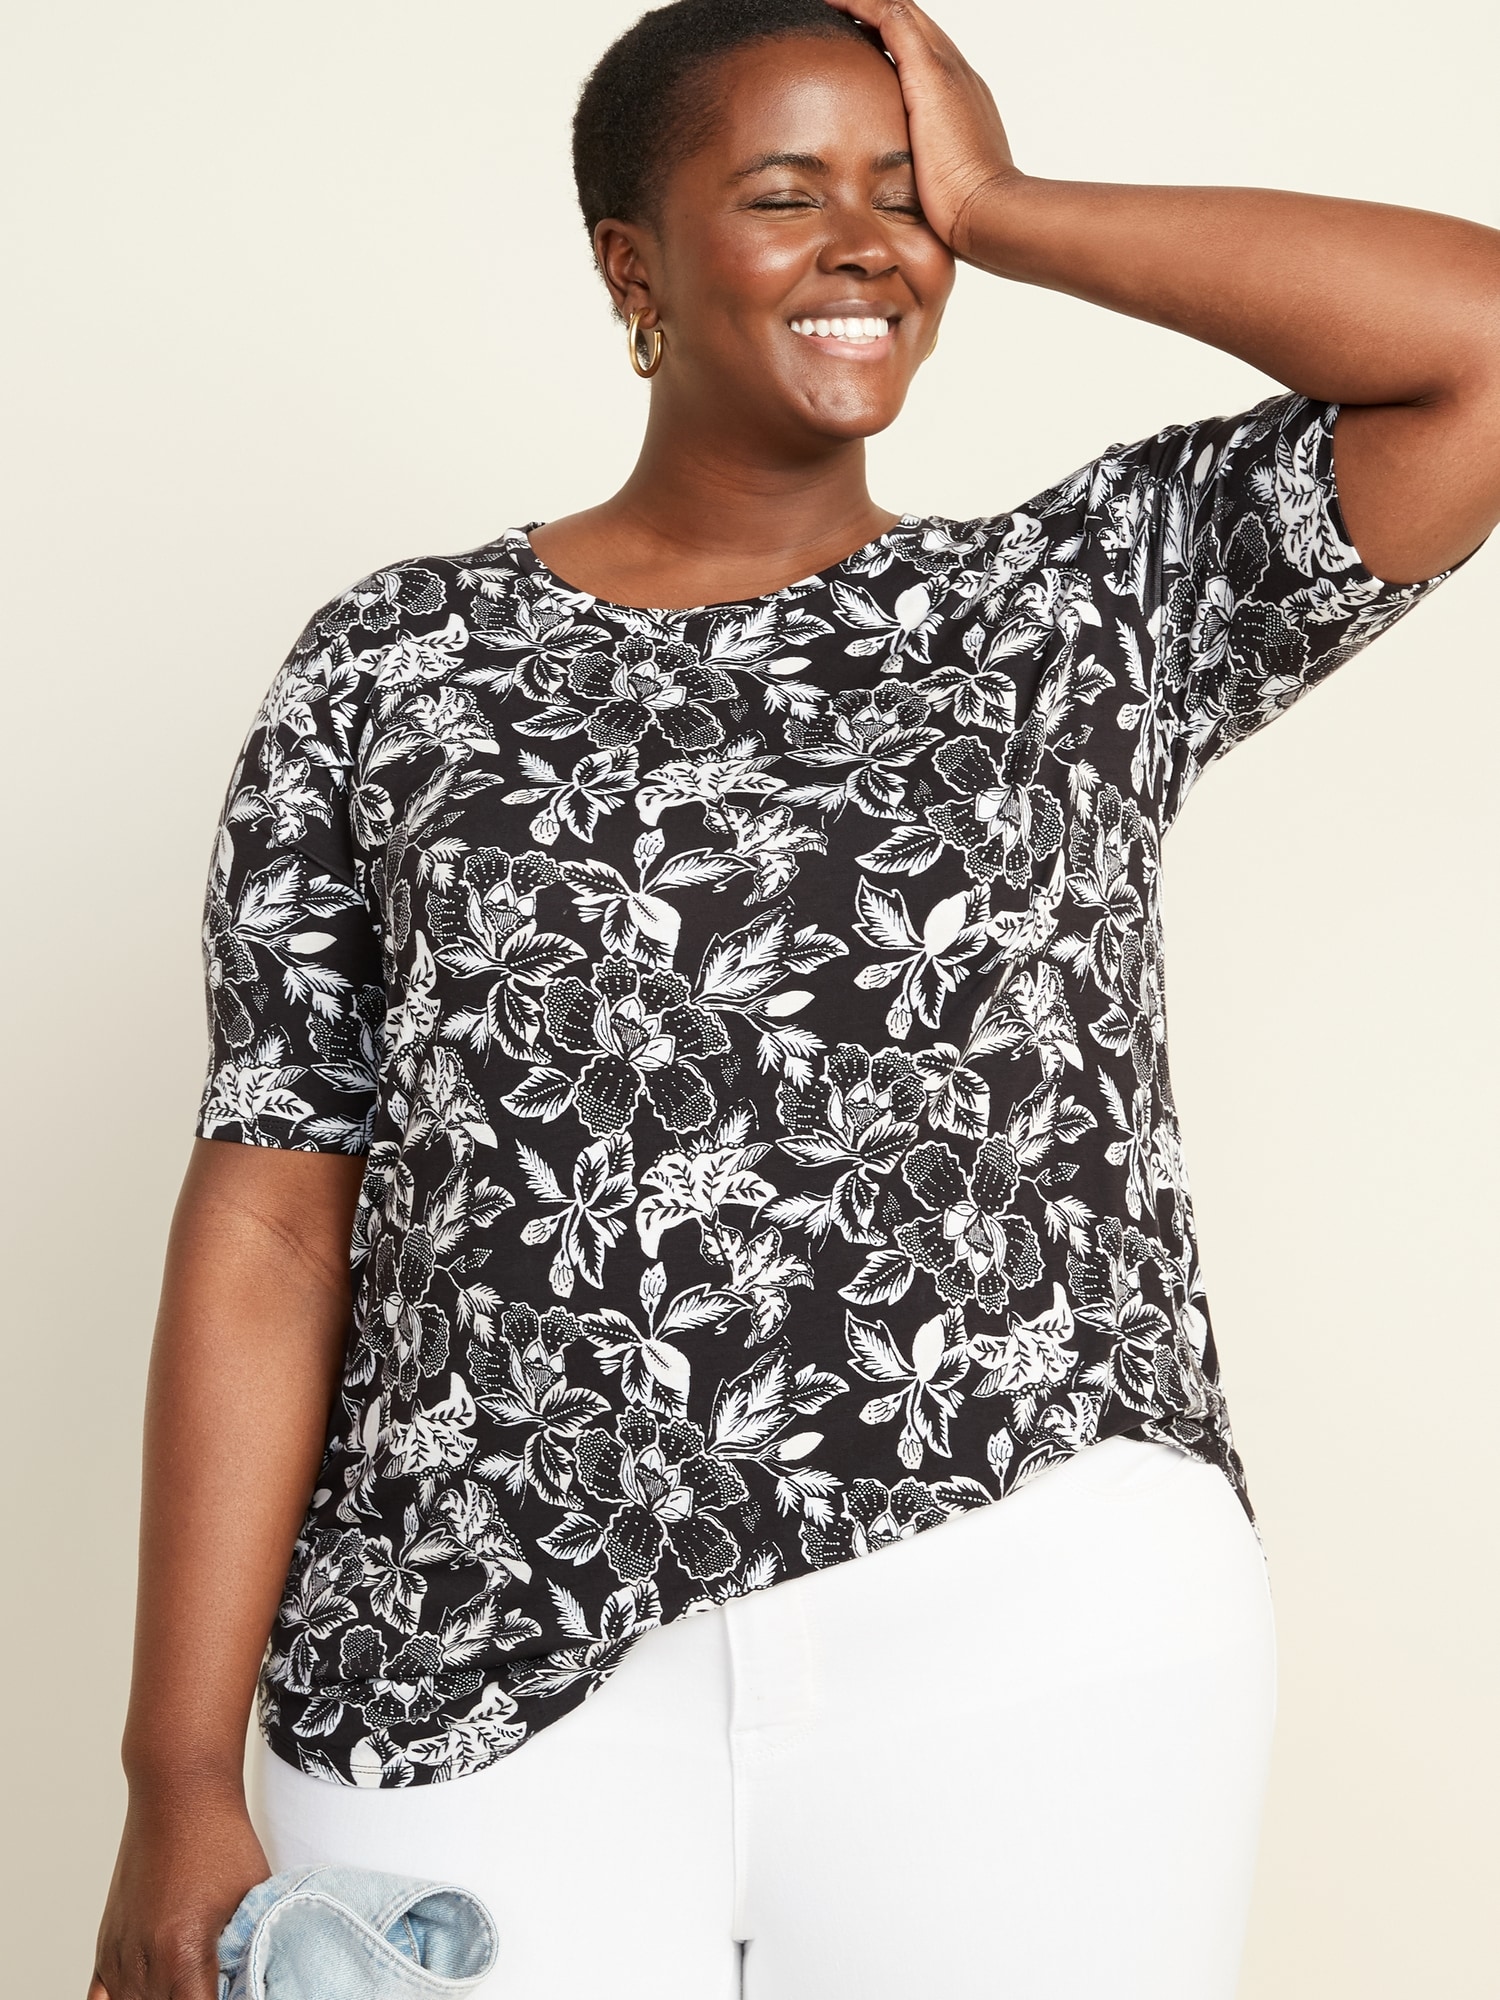 Old navy Plus Size shirts